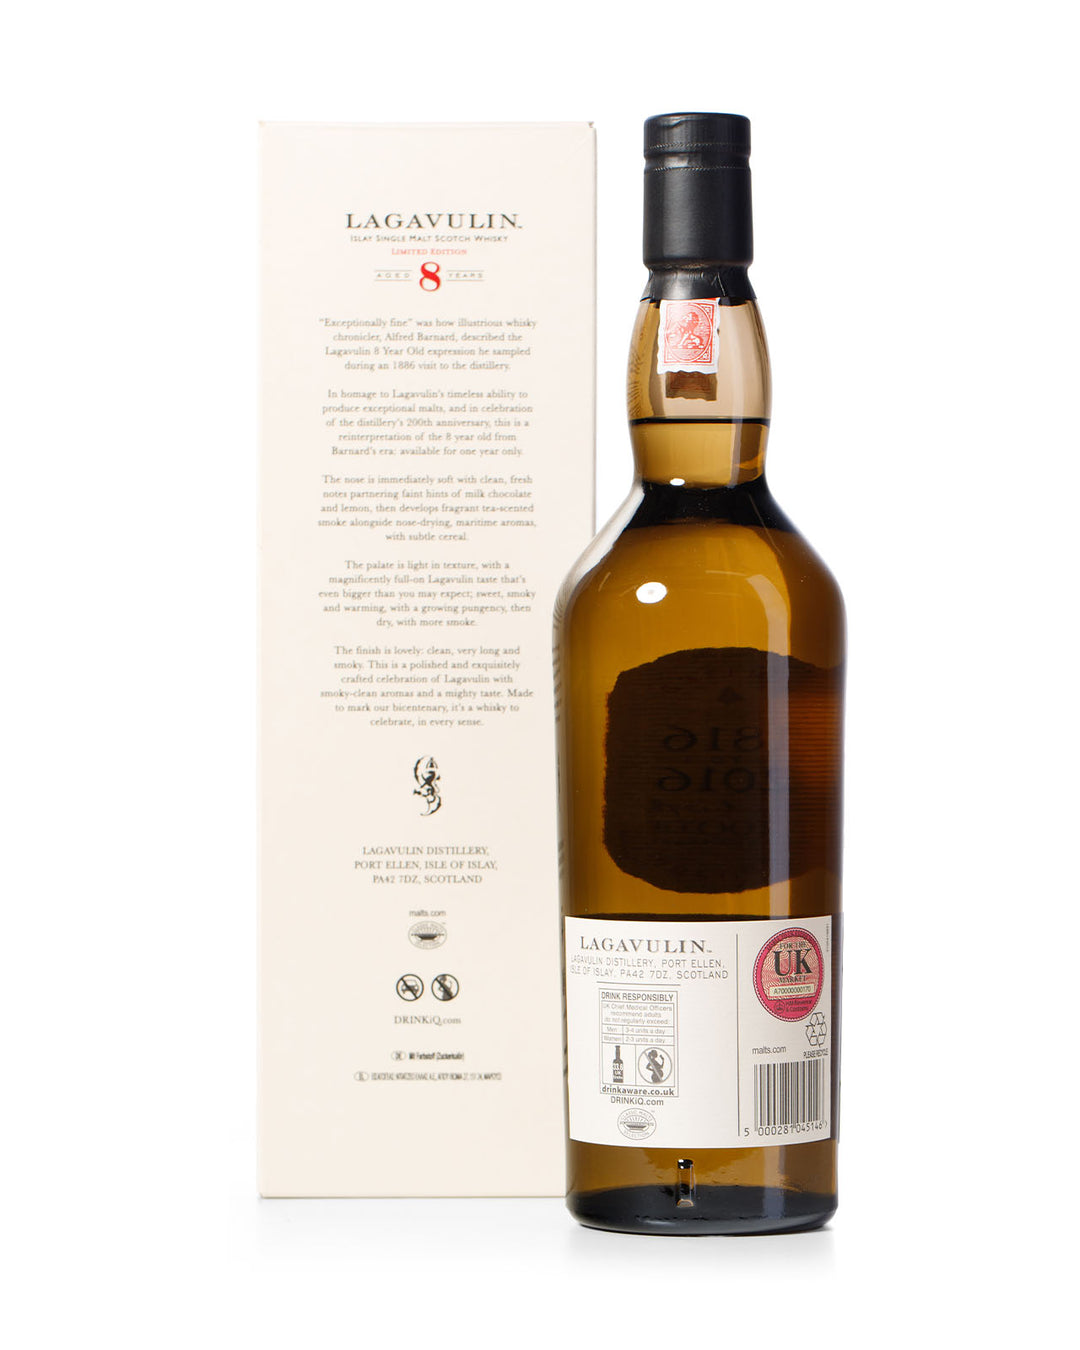 Lagavulin 8 Year Old 200th Anniversary Bottled 2016 With Original Box